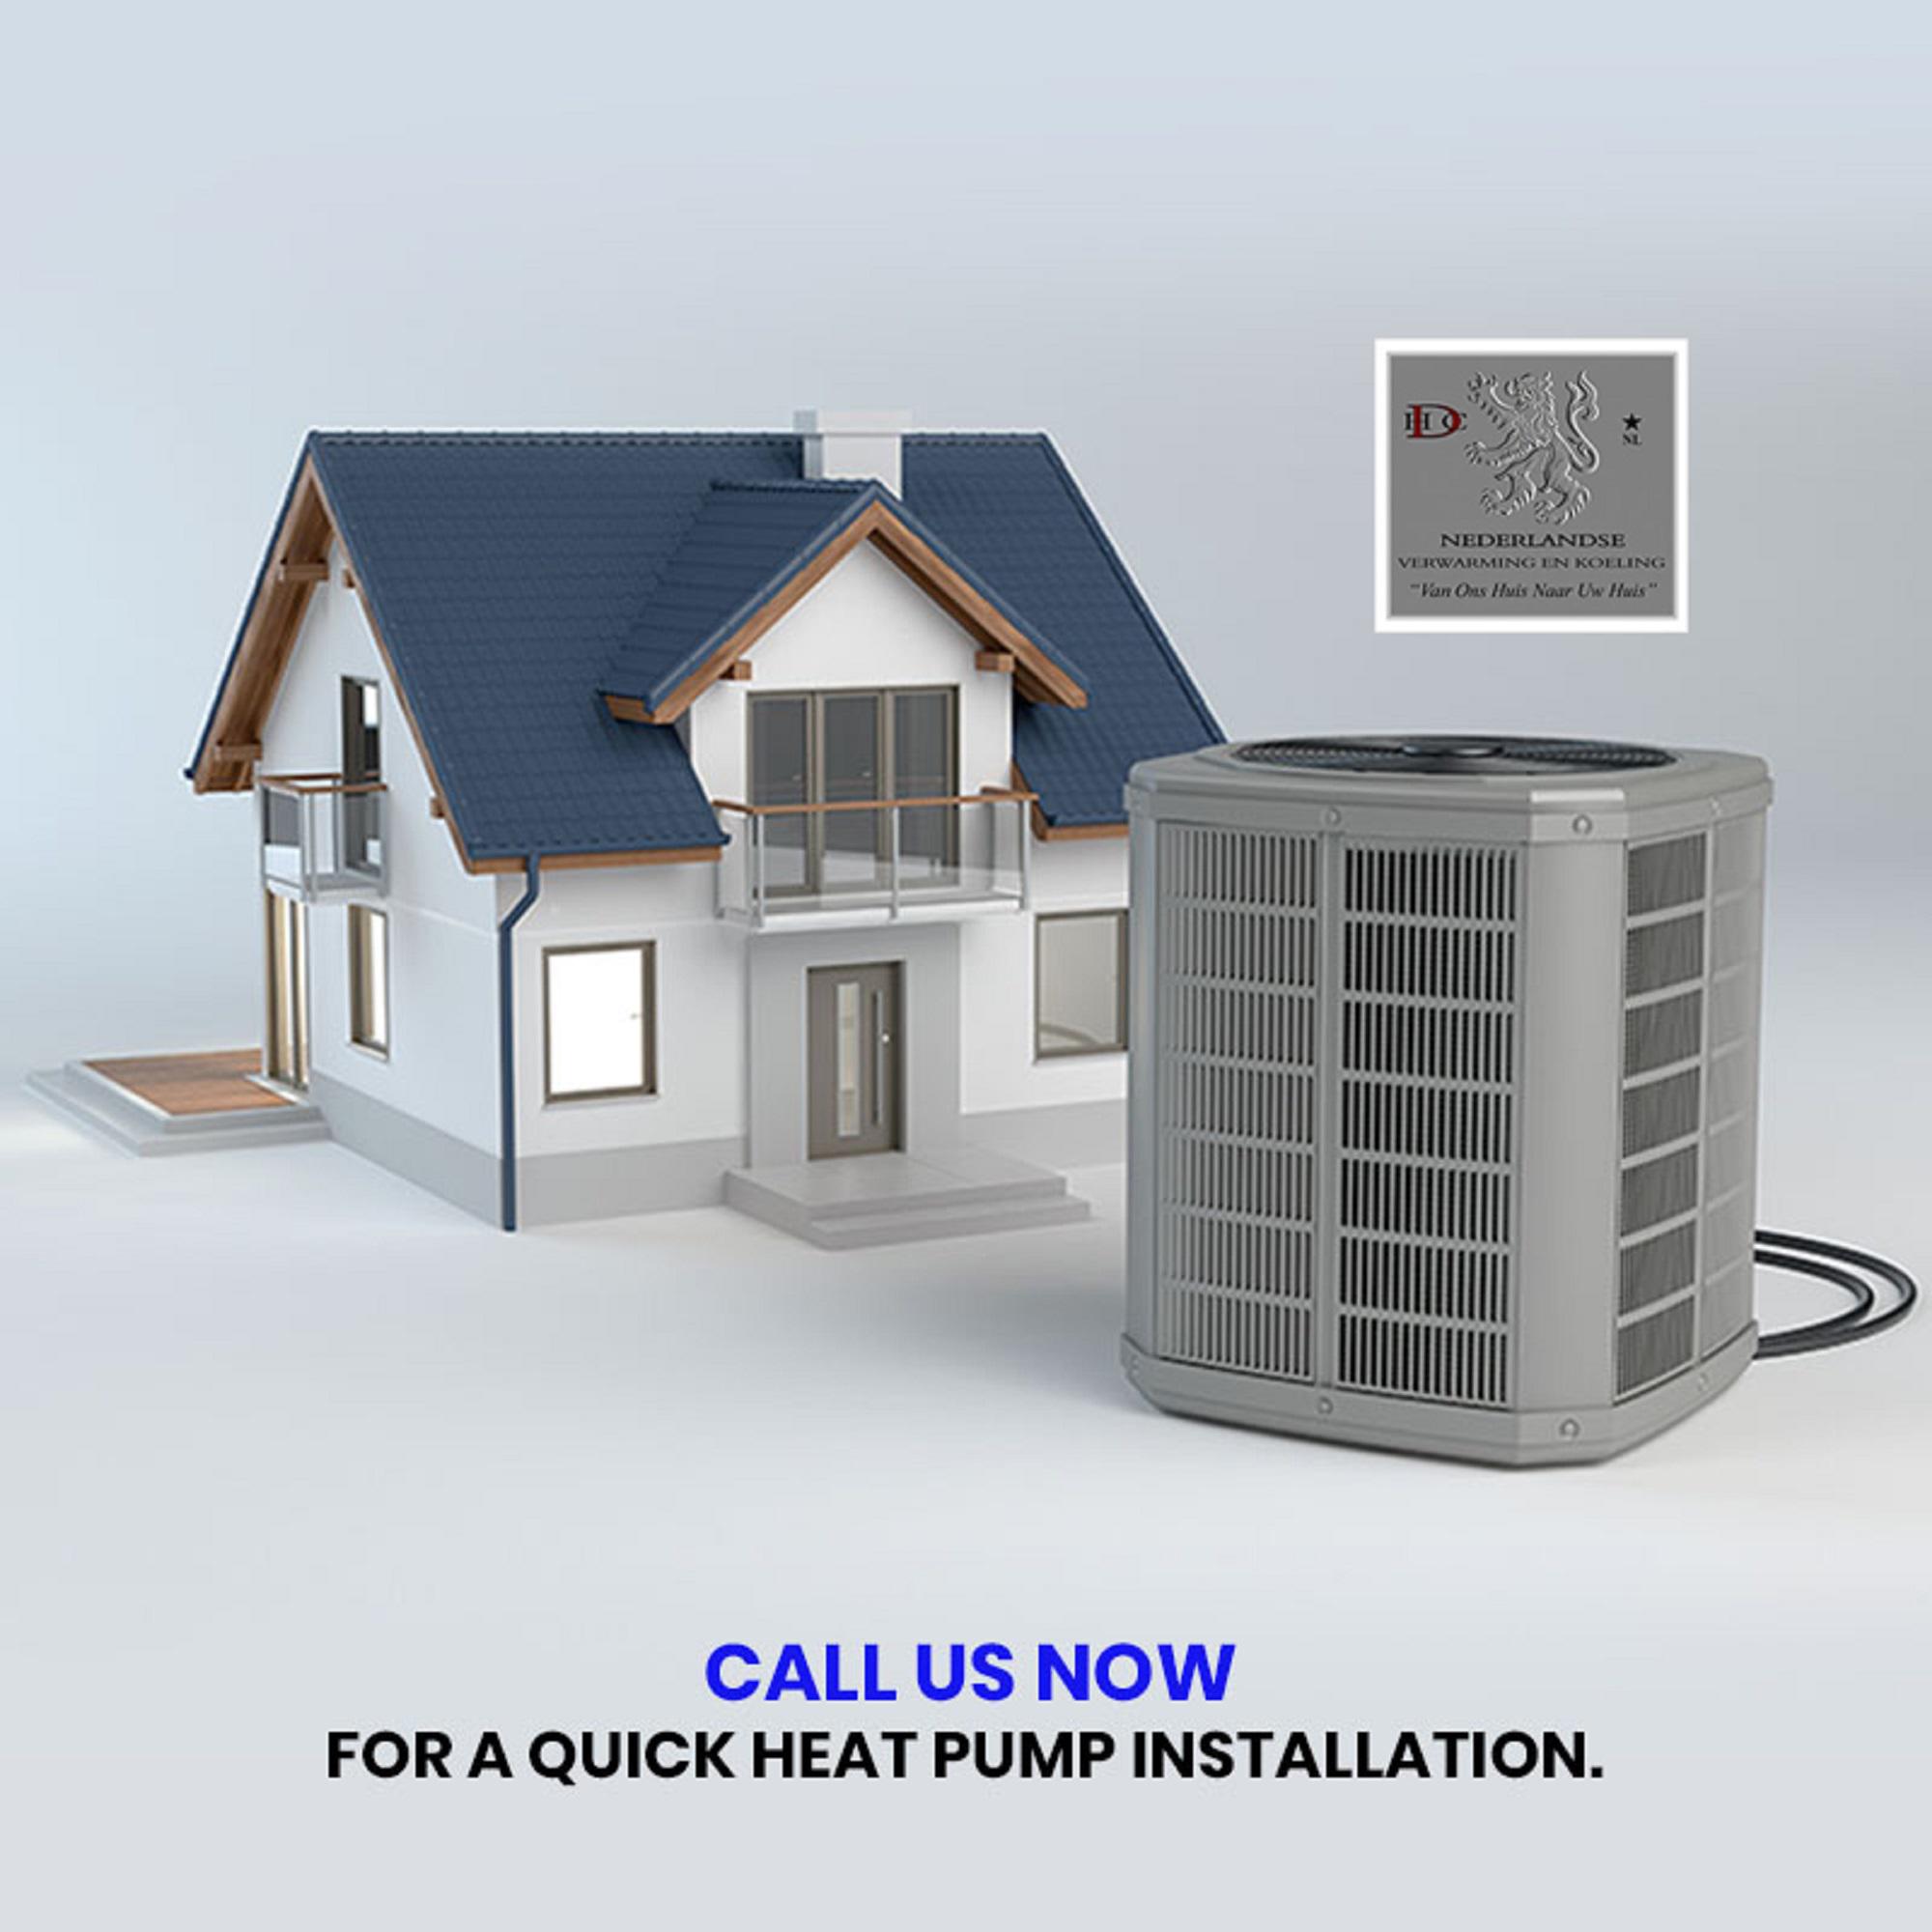 Buy a new heat pump this winter to keep your family warm. Heat pumps require less maintenance, have a lower operating cost, and reduce carbon emissions. Call us now to schedule an installation appointment!